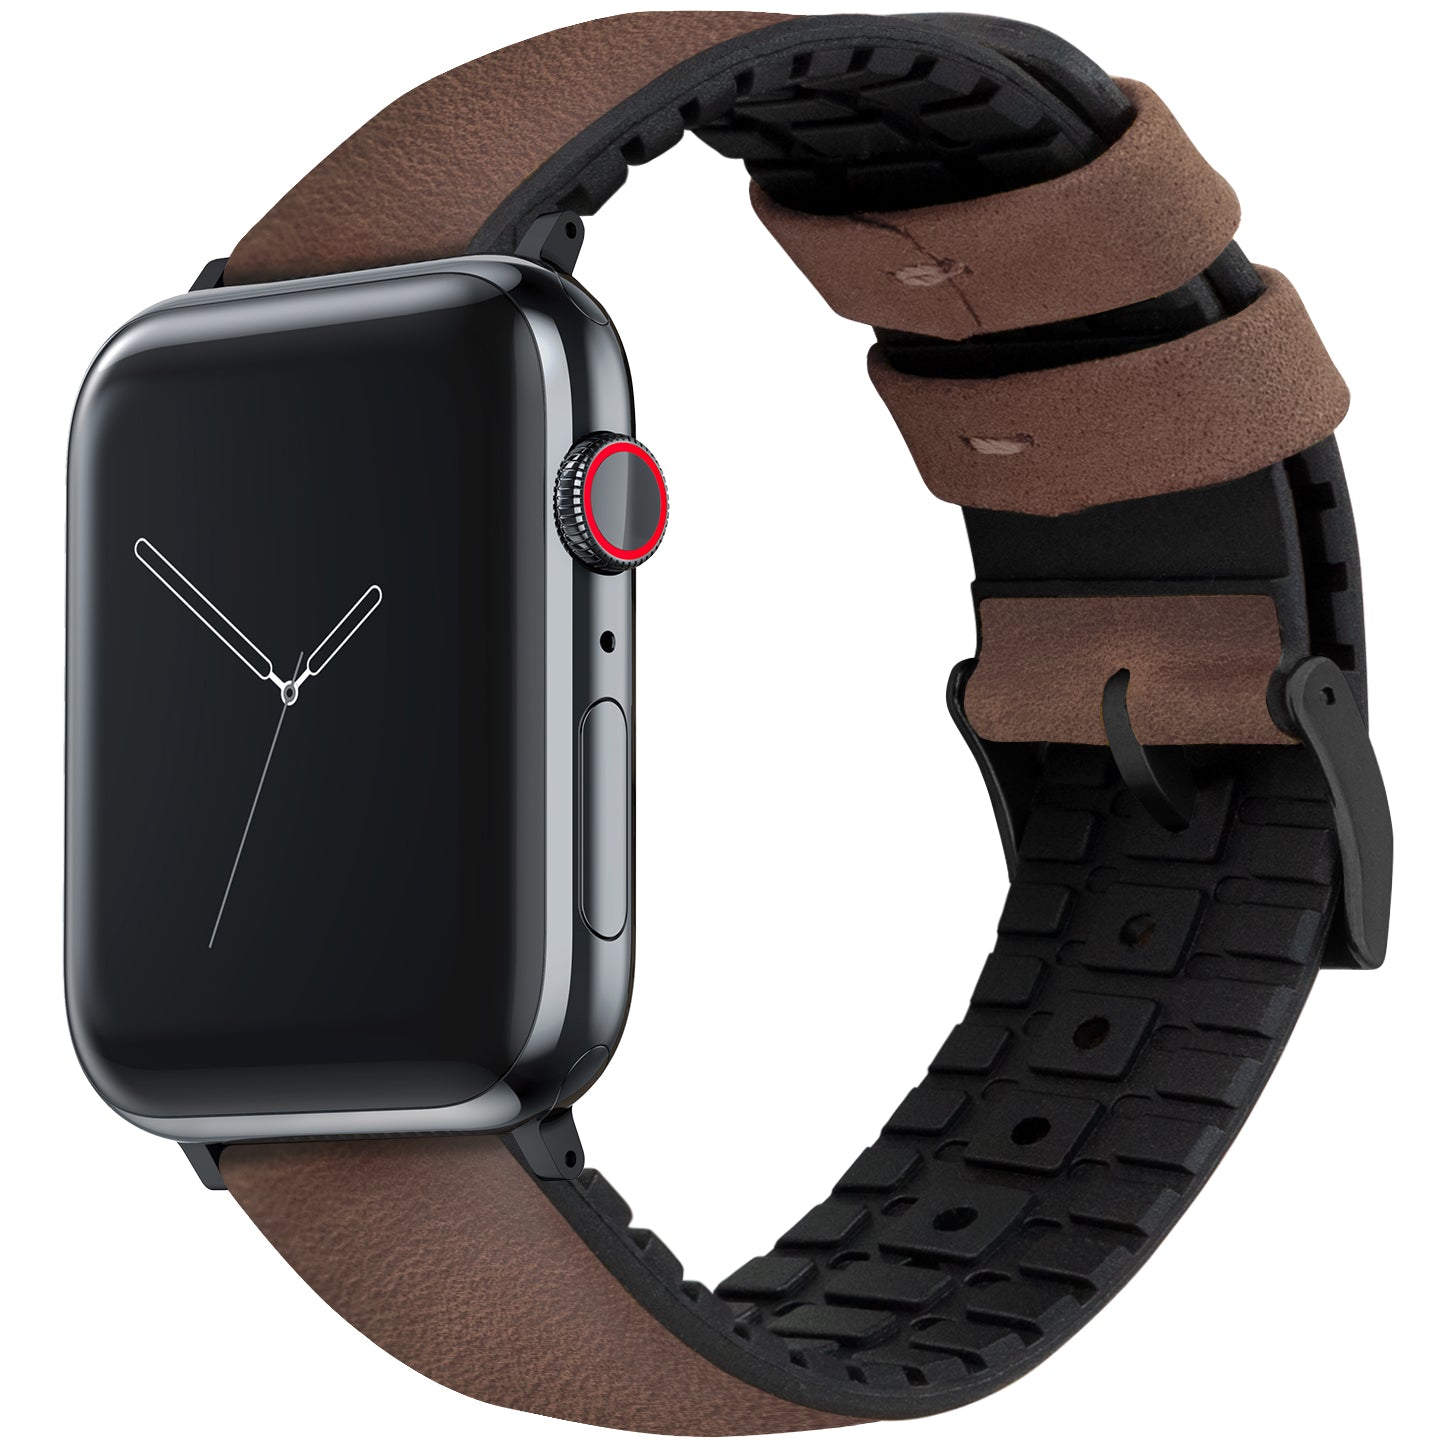 Apple Watch | Walnut Brown Leather and Rubber Hybrid - Barton Watch Bands